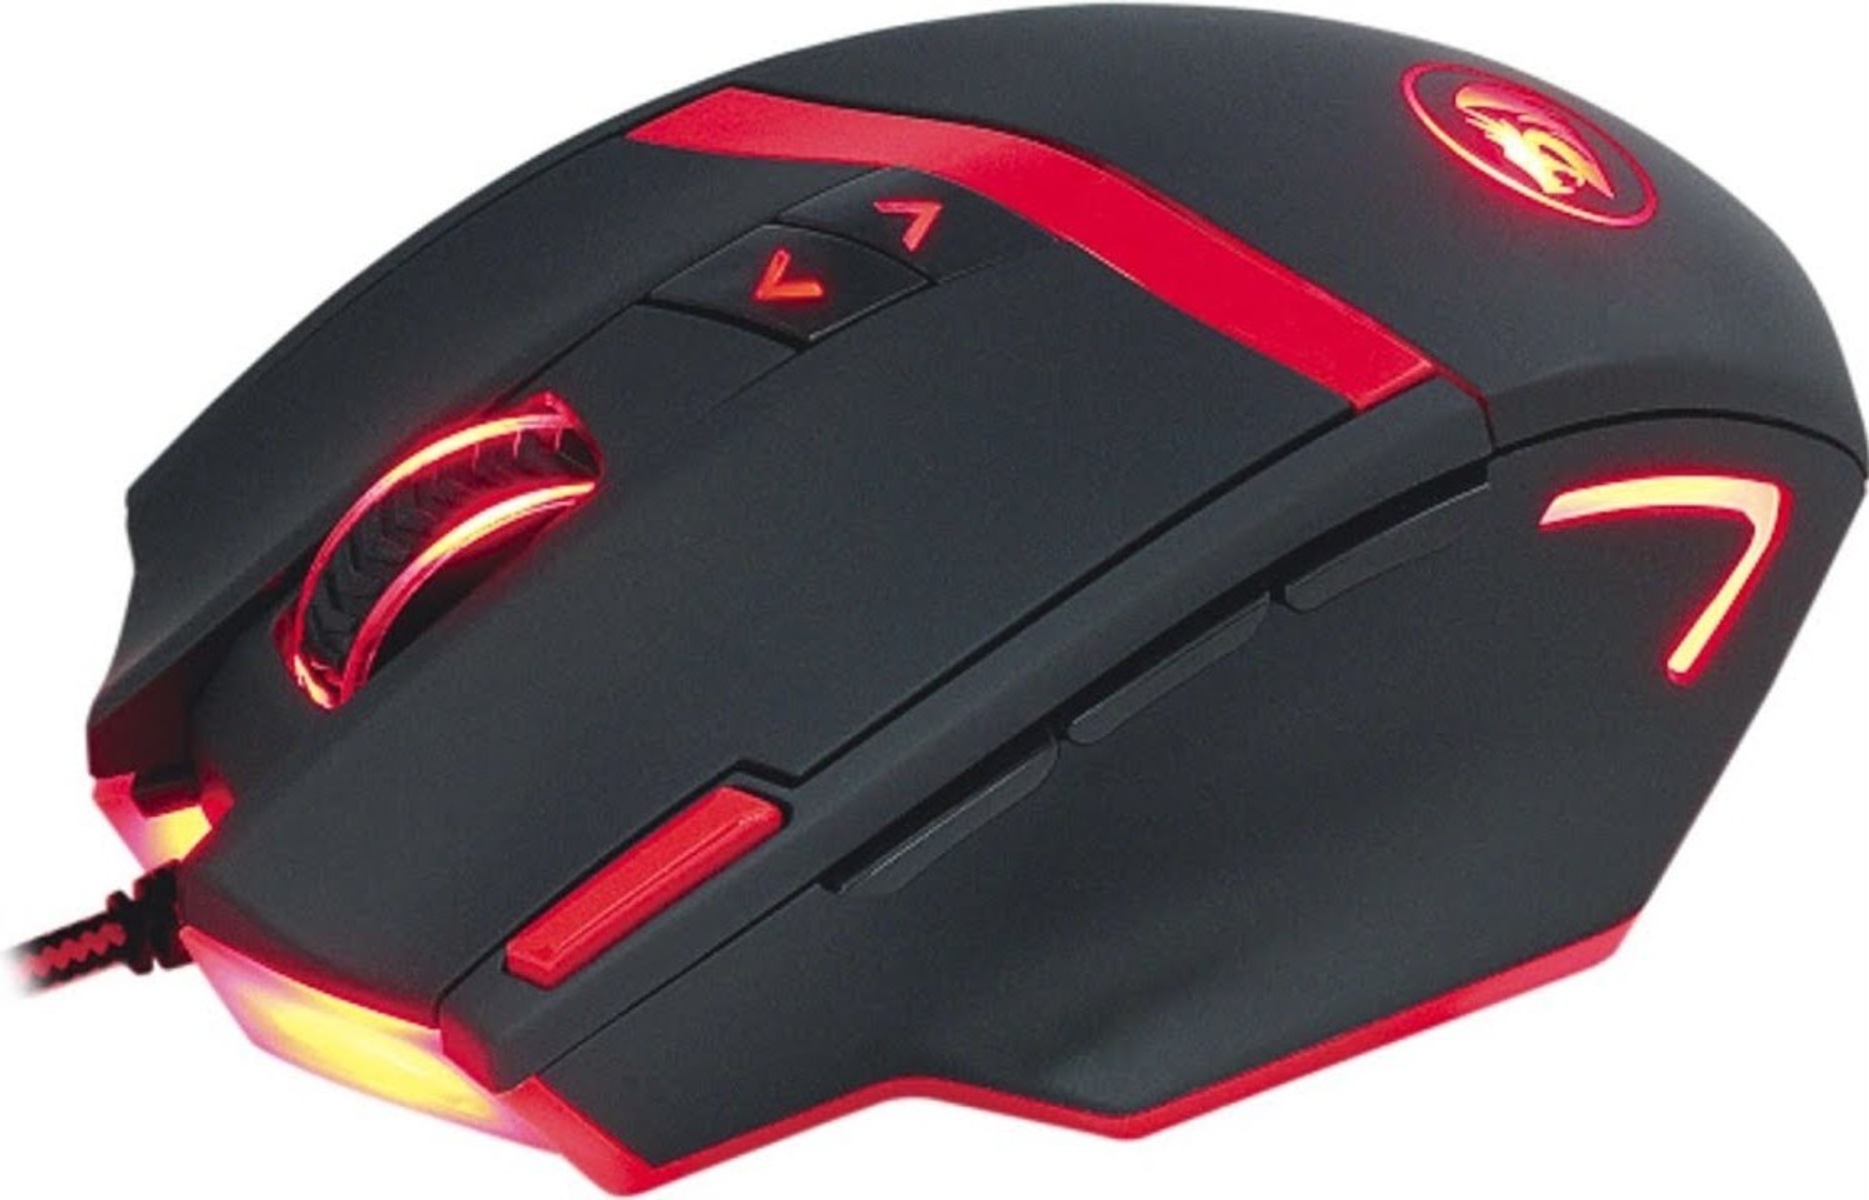 How To Setup And Use Red Dragon Mammoth Gaming Mouse